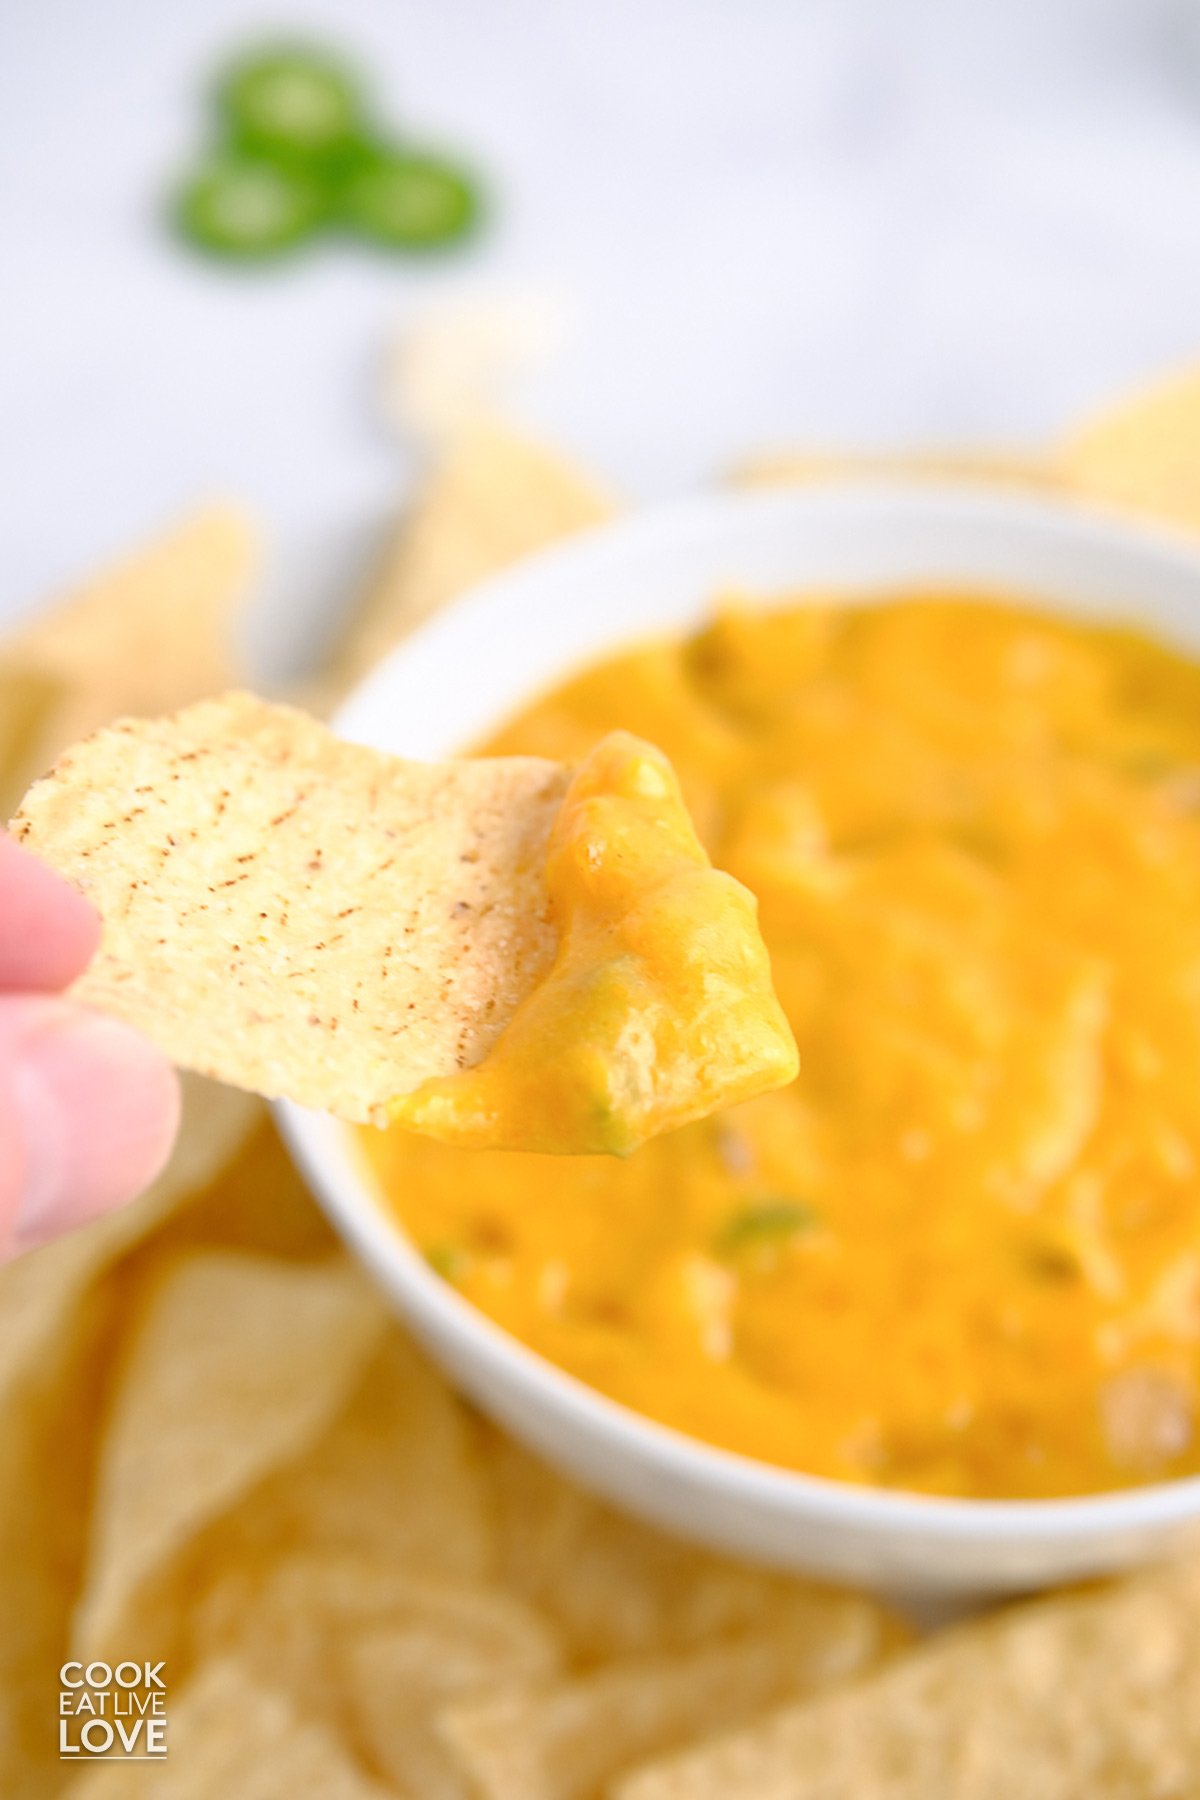 A chip dipping into vegan cheese sauce.